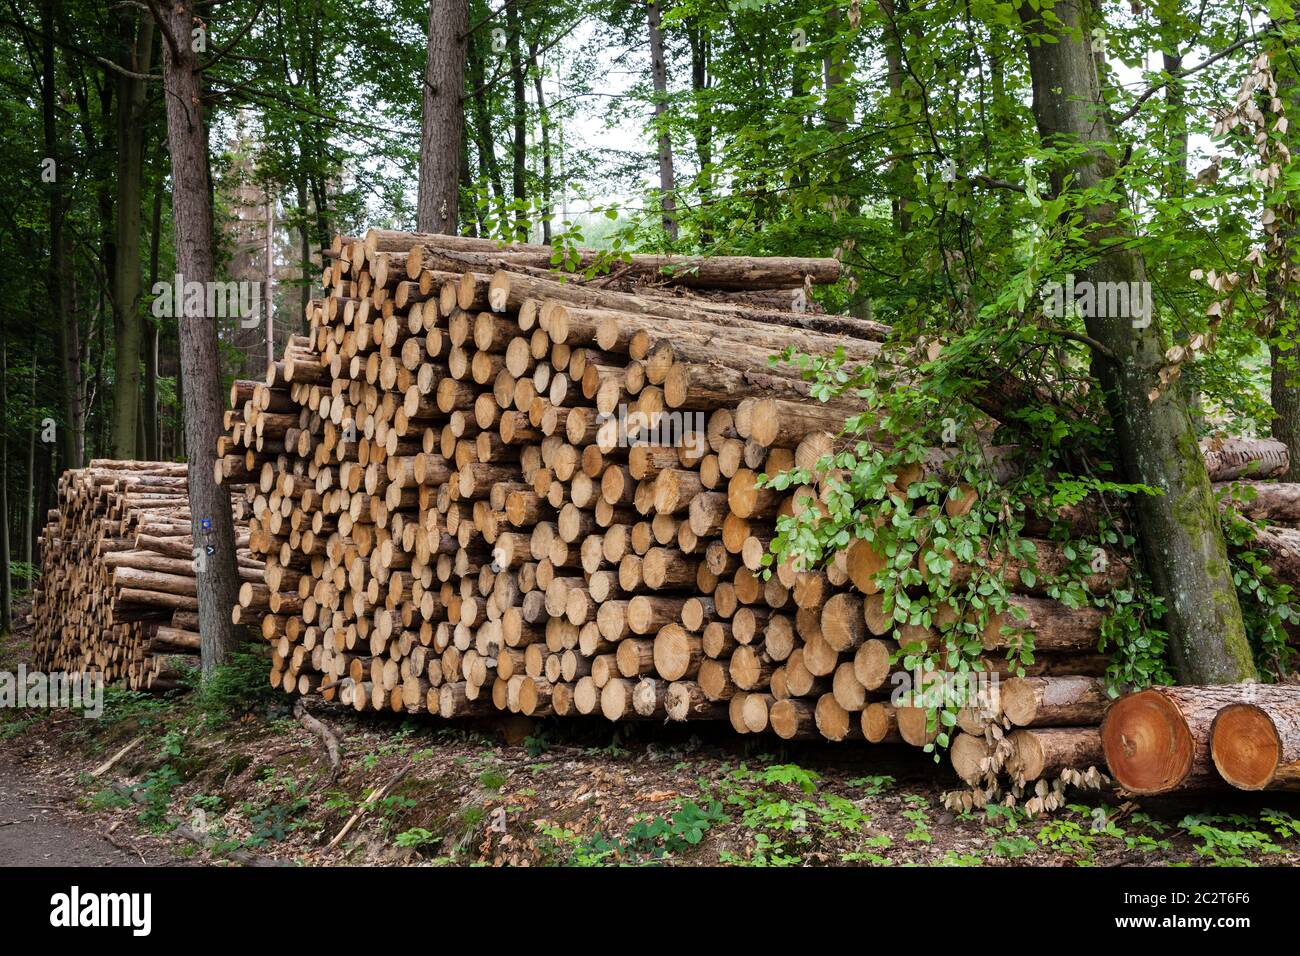 forest dieback, felled trees, tree trunks, in a forest near Altenberg in the Bergisches Land region, North Rhine-Westphalia, Germany.  Waldsterben, ge Stock Photo